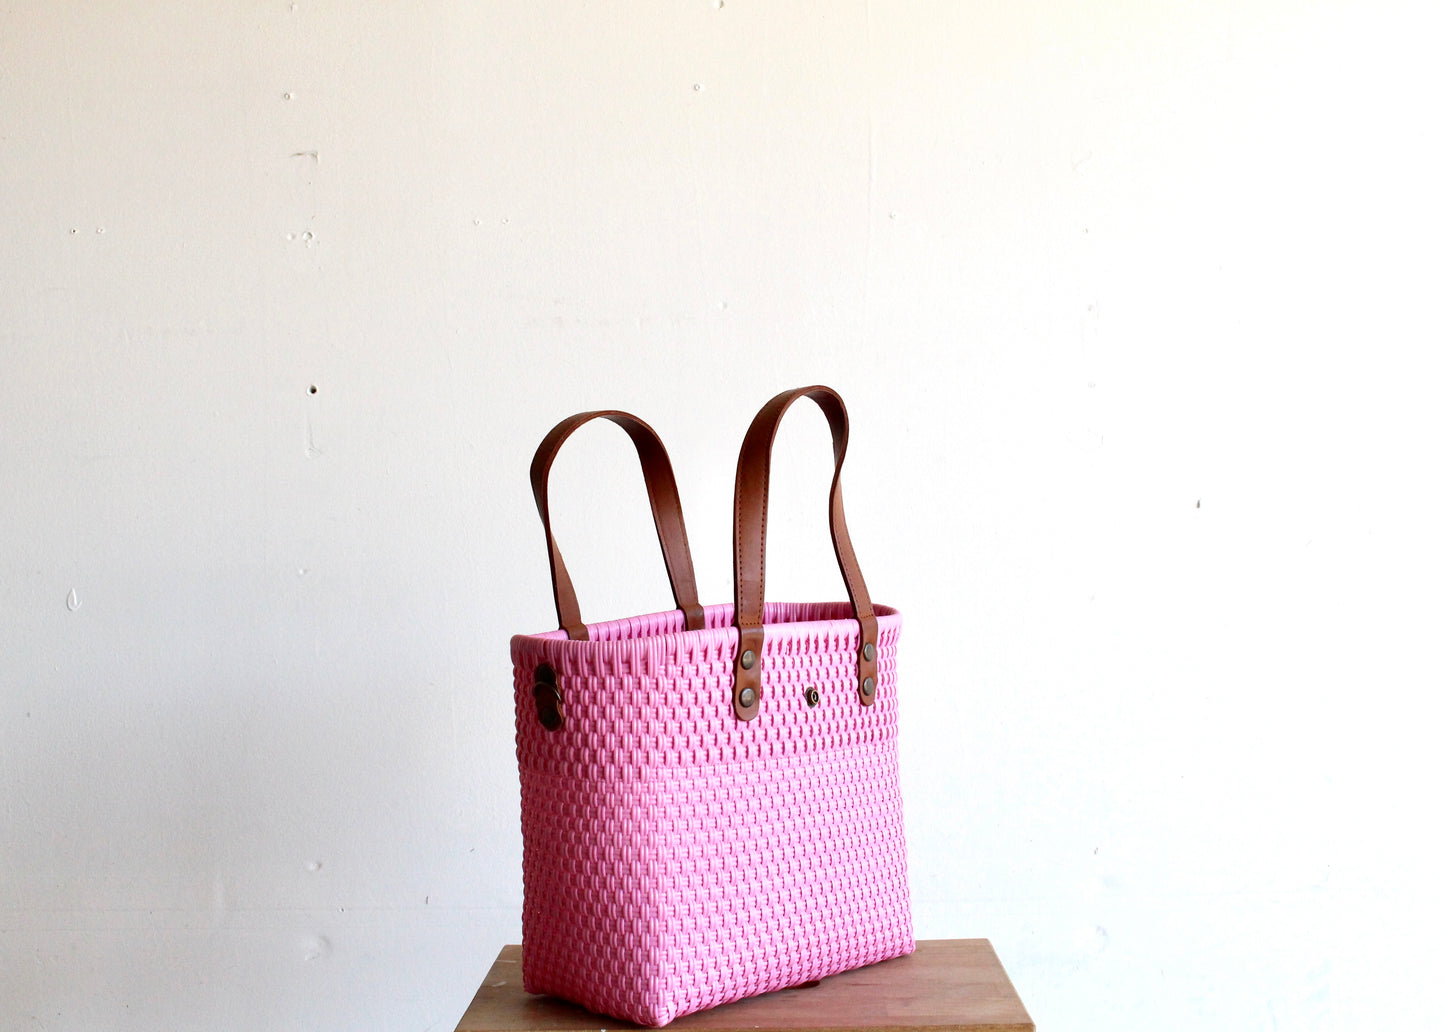 Pink Purse bag by MexiMexi